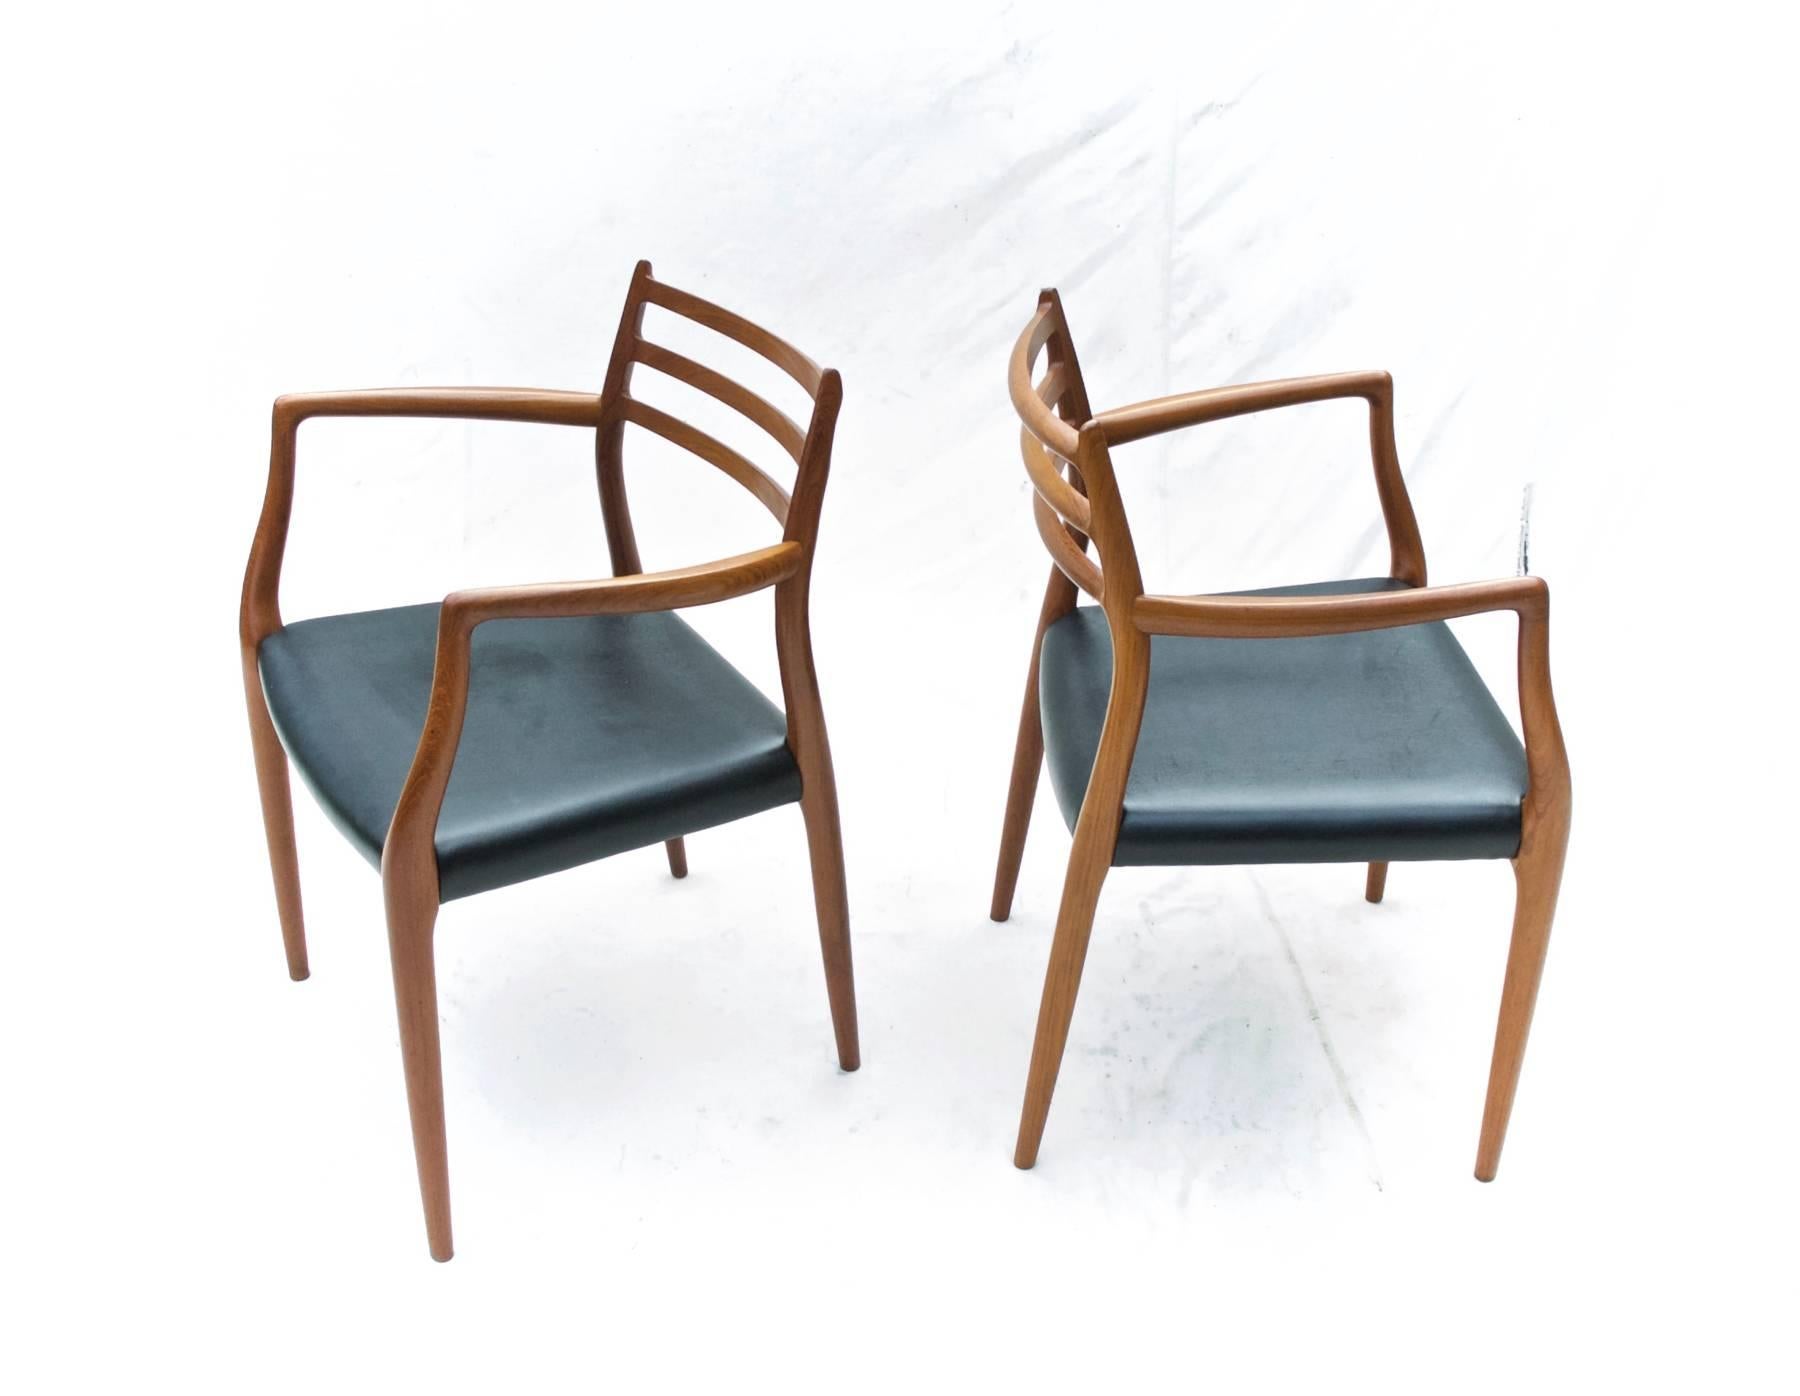 A fine pair of model 62 dining chairs by N.O. Moller. The gorgeous and sculptural Danish Modern armchairs are in excellent structural condition throughout and possess a richness of wood grain that set them apart from other teak wood models of this